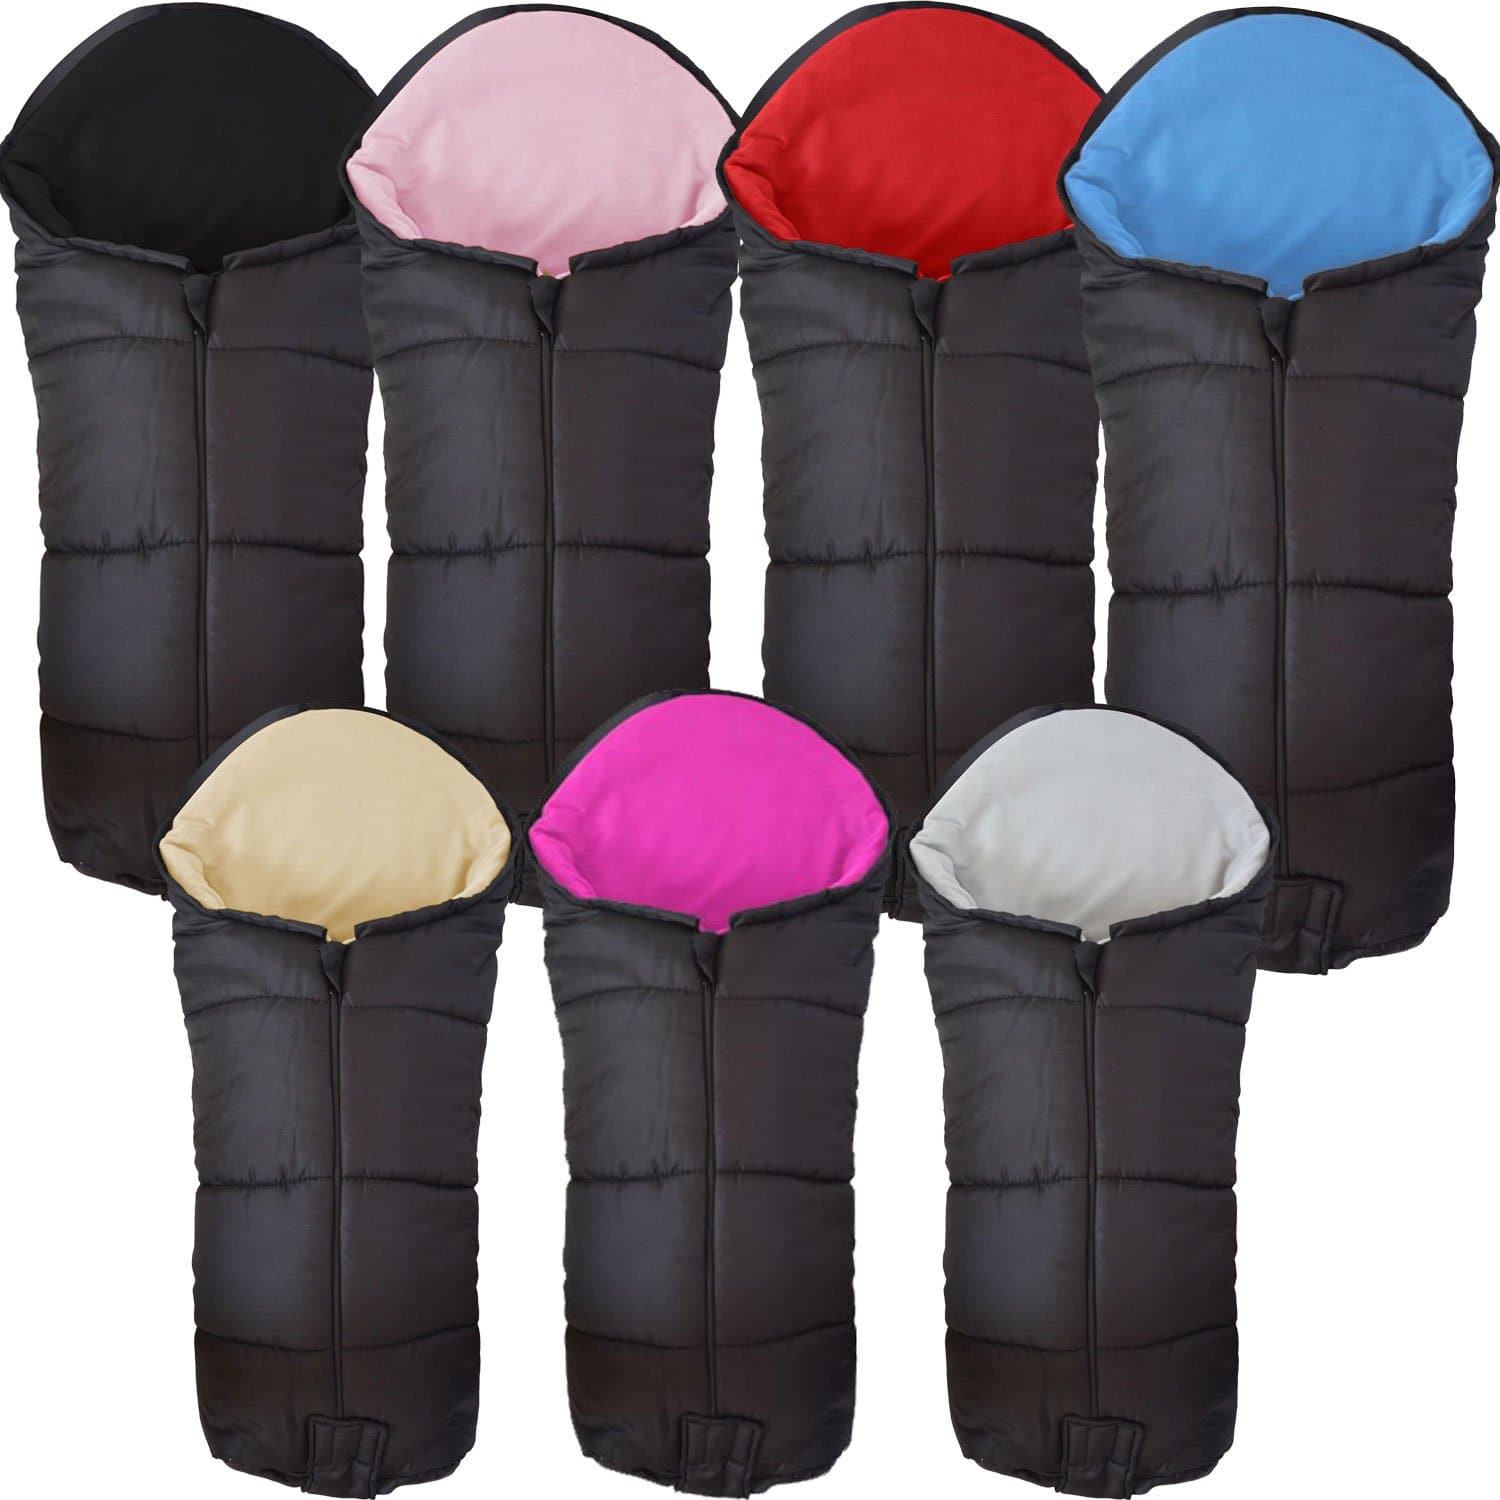 Universal Deluxe Pushchair Footmuff / Cosy Toes - Fits All Pushchairs / Prams And Buggies - For Your Little One